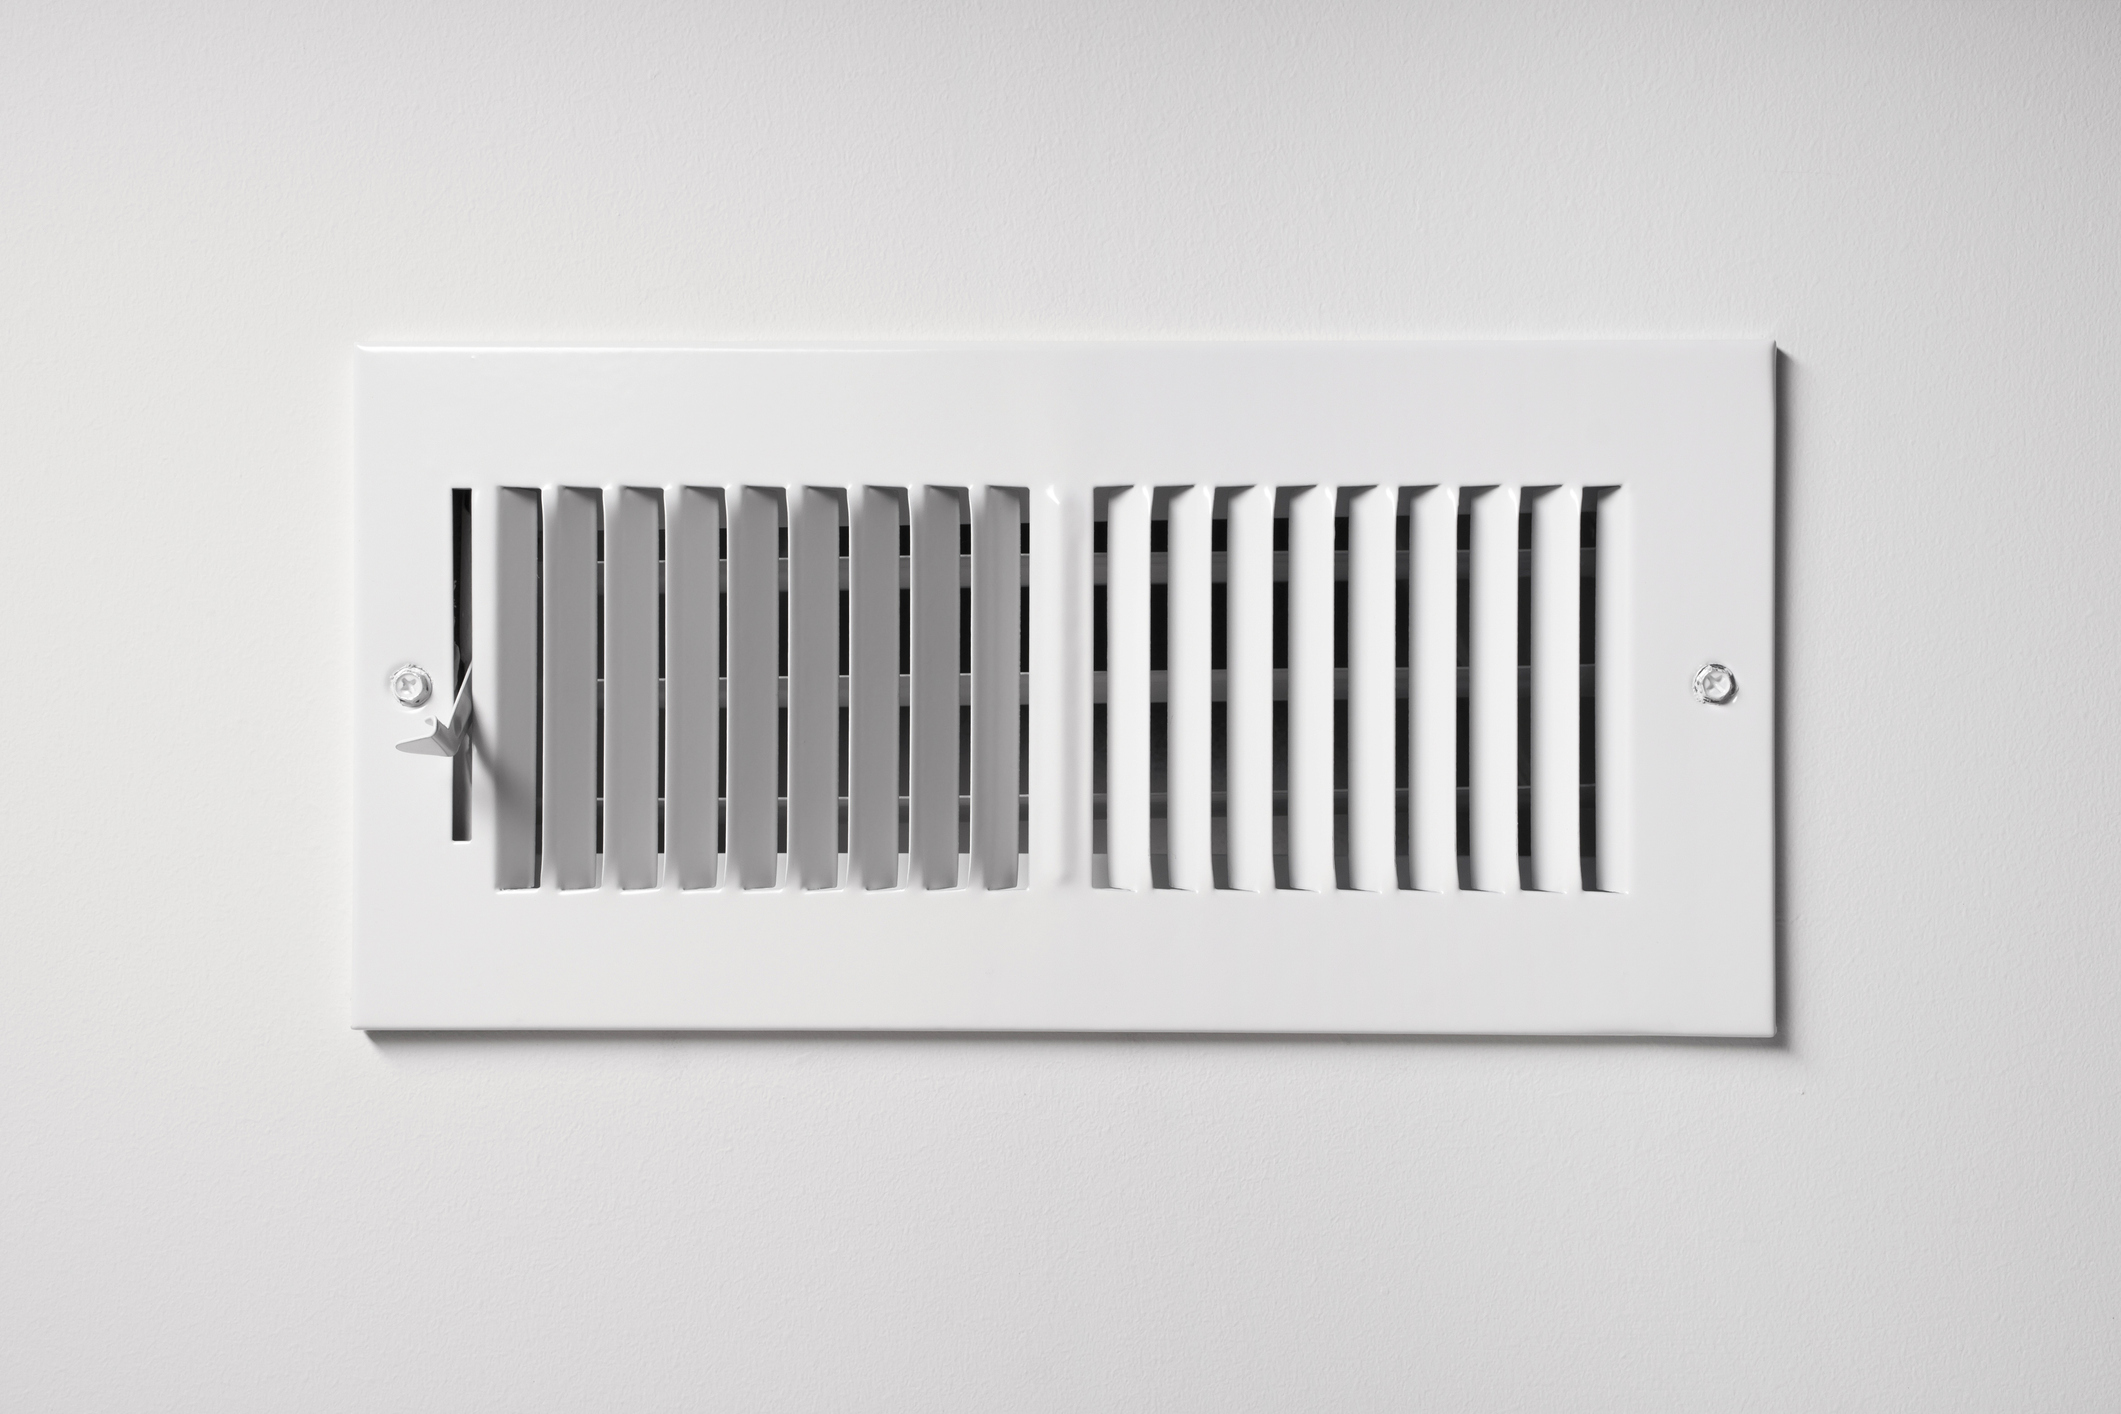 A heating/cooling vent register on the white wall of a home, with open/close lever.